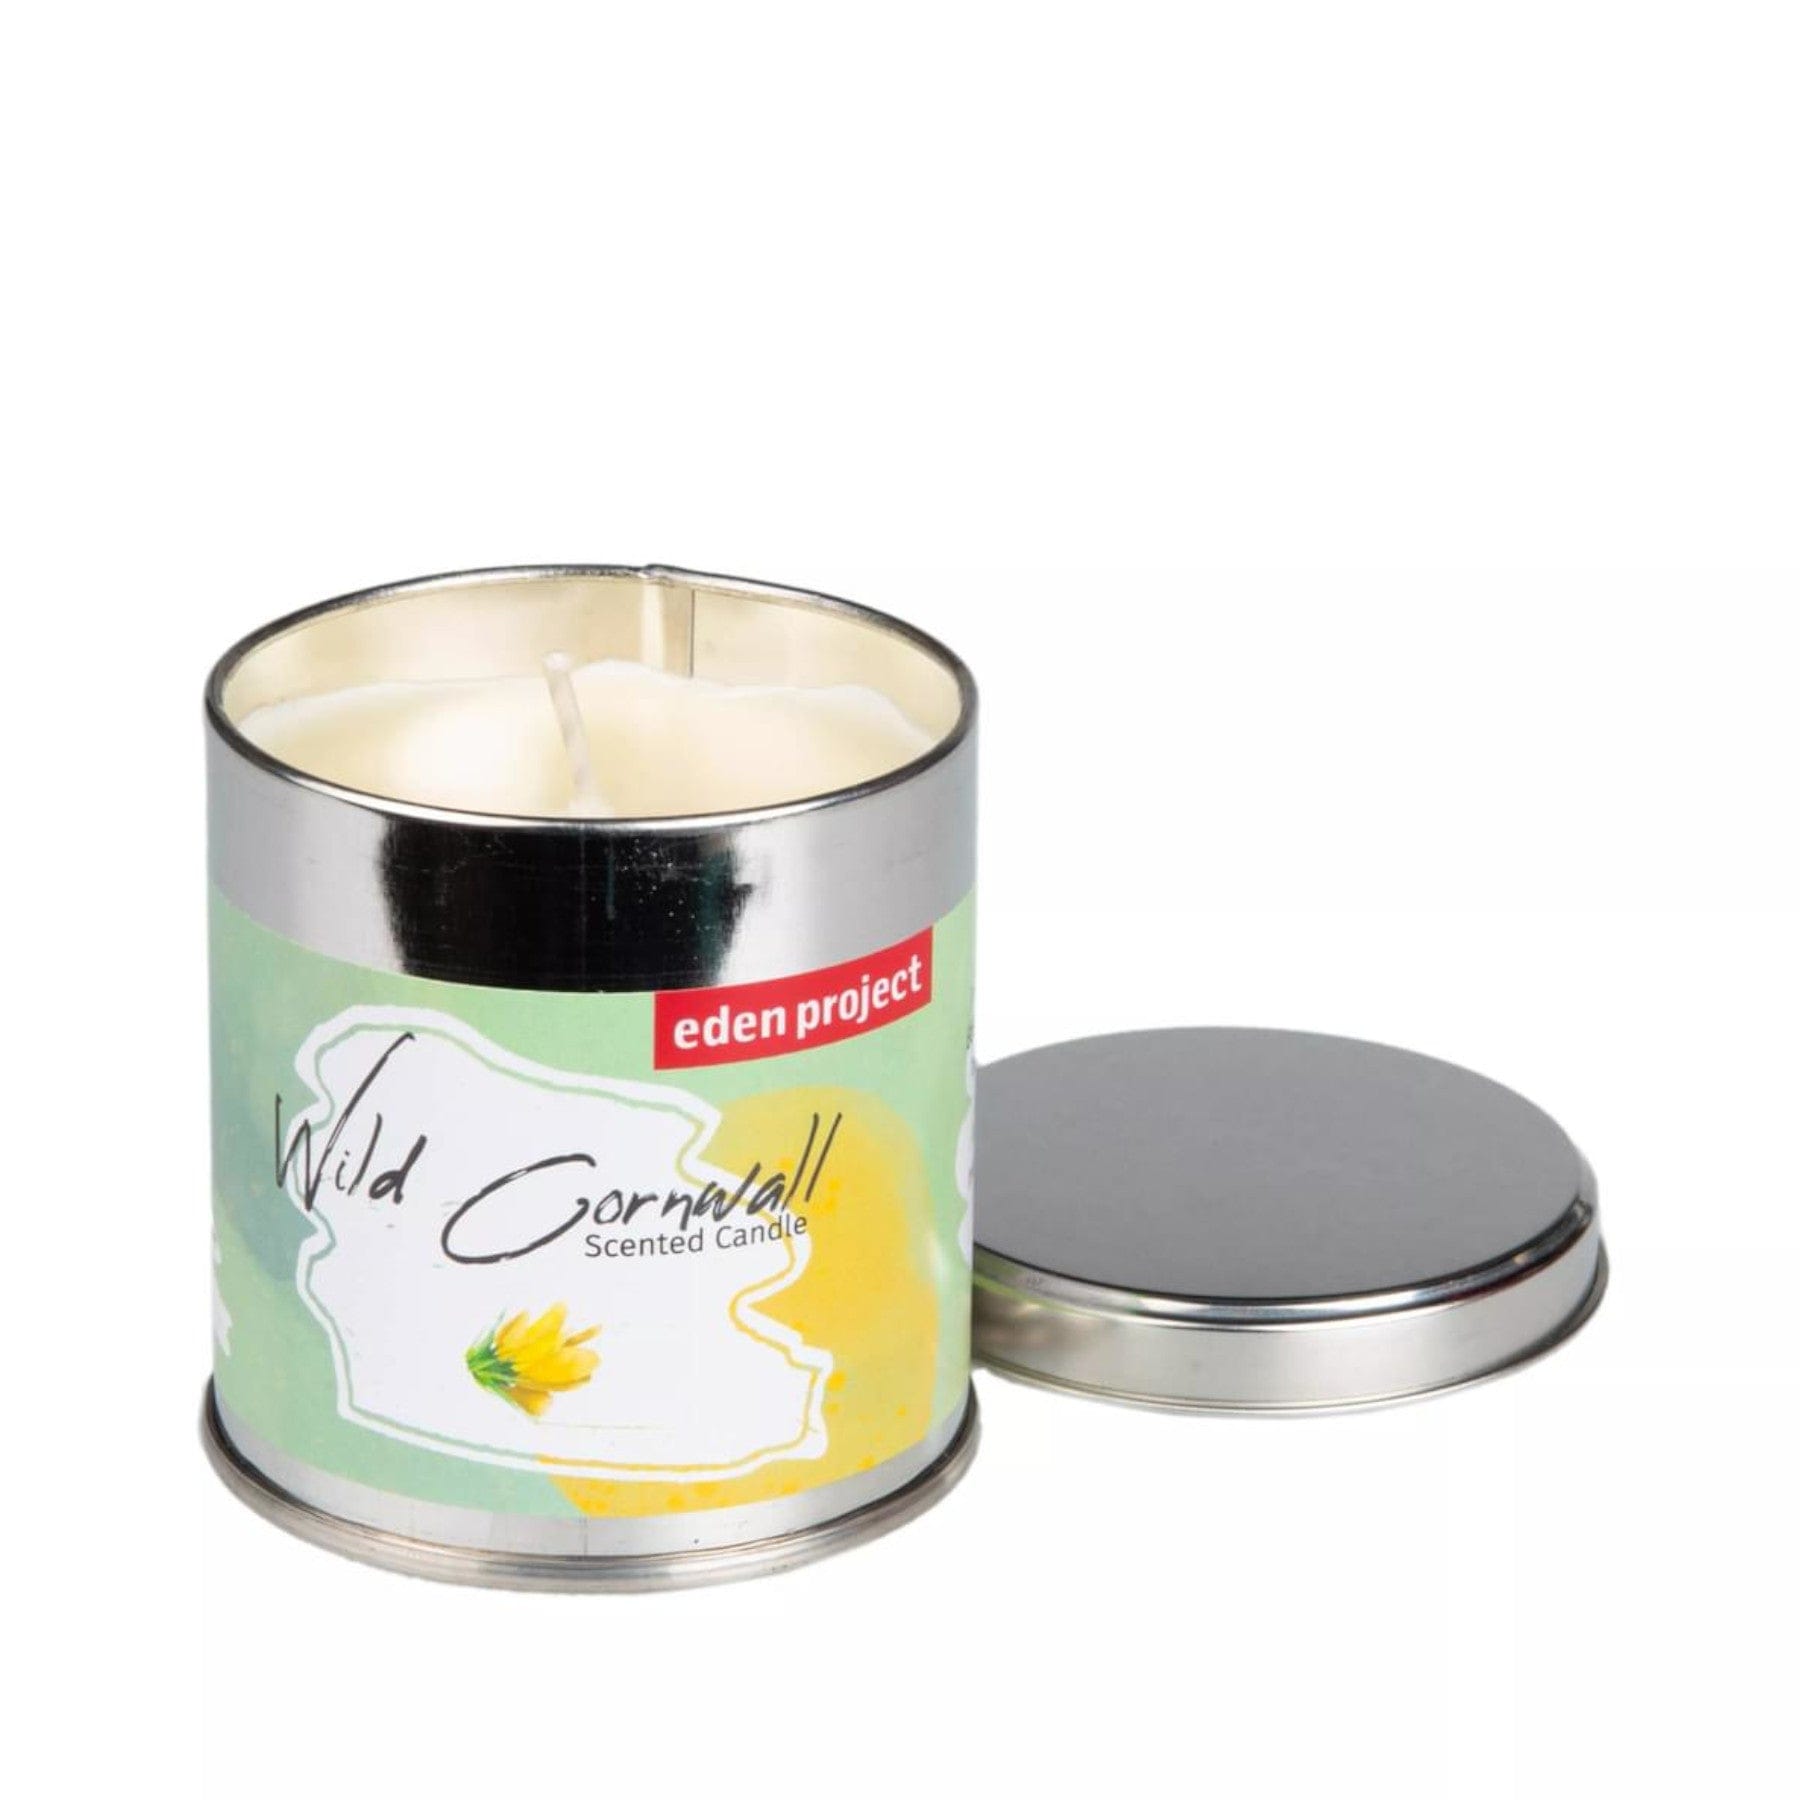 Wild Cornwall scented tin candle